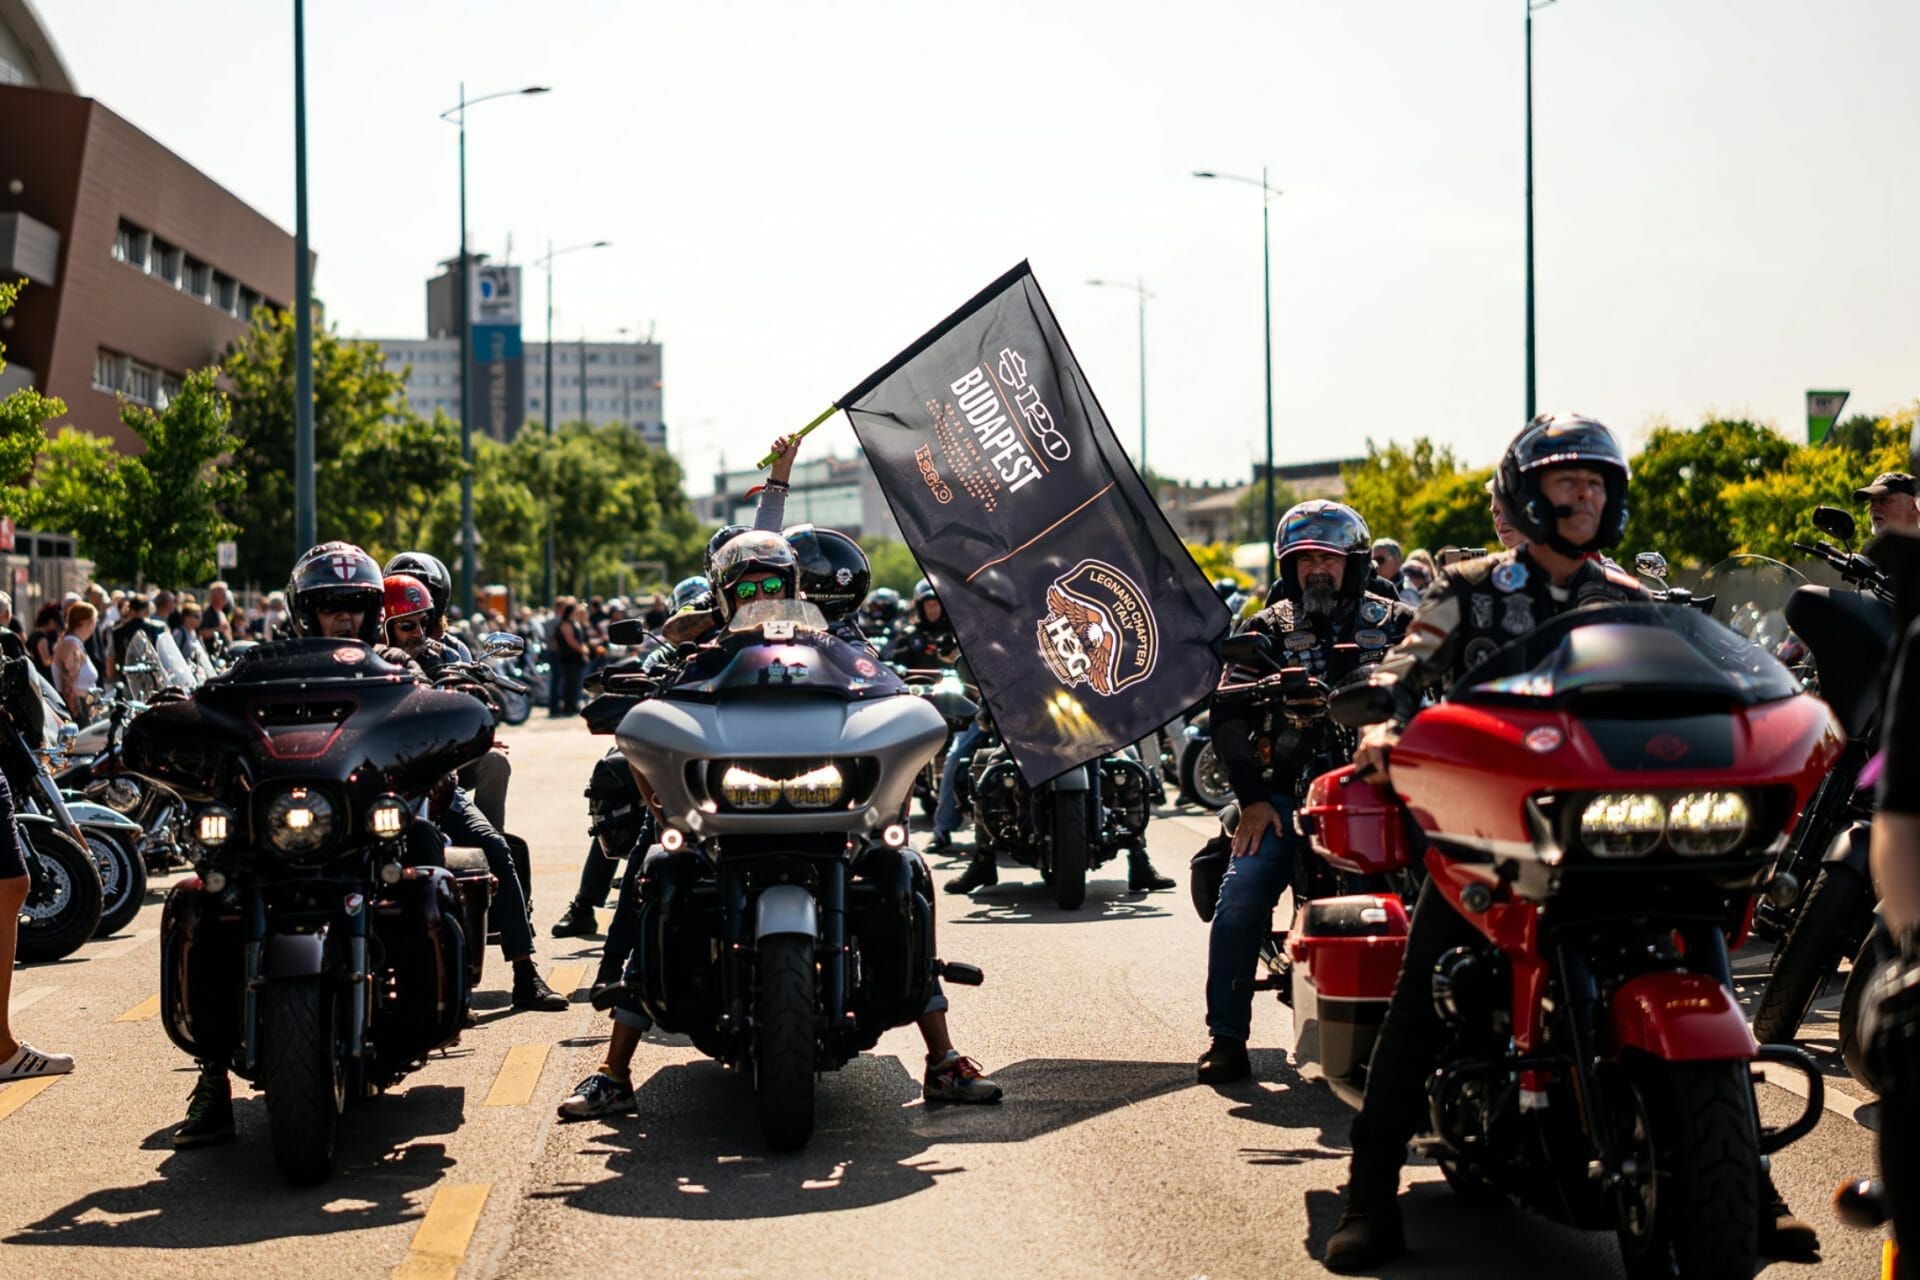 The Harley-Davidson Festival in Budapest: a mix of horsepower, music and international community